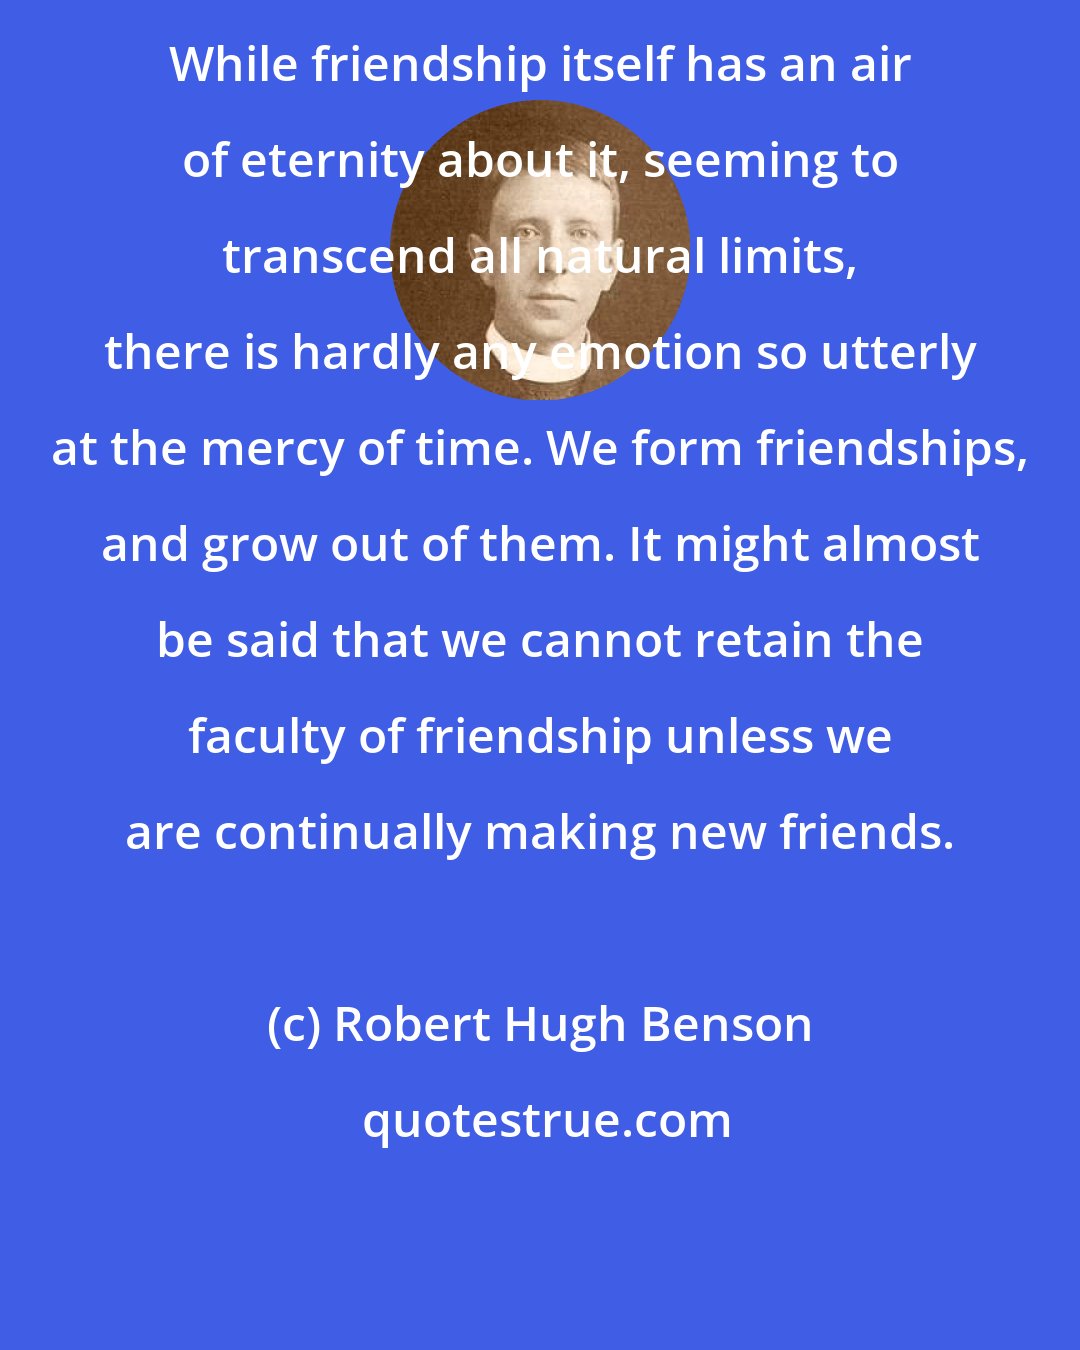 Robert Hugh Benson: While friendship itself has an air of eternity about it, seeming to transcend all natural limits, there is hardly any emotion so utterly at the mercy of time. We form friendships, and grow out of them. It might almost be said that we cannot retain the faculty of friendship unless we are continually making new friends.